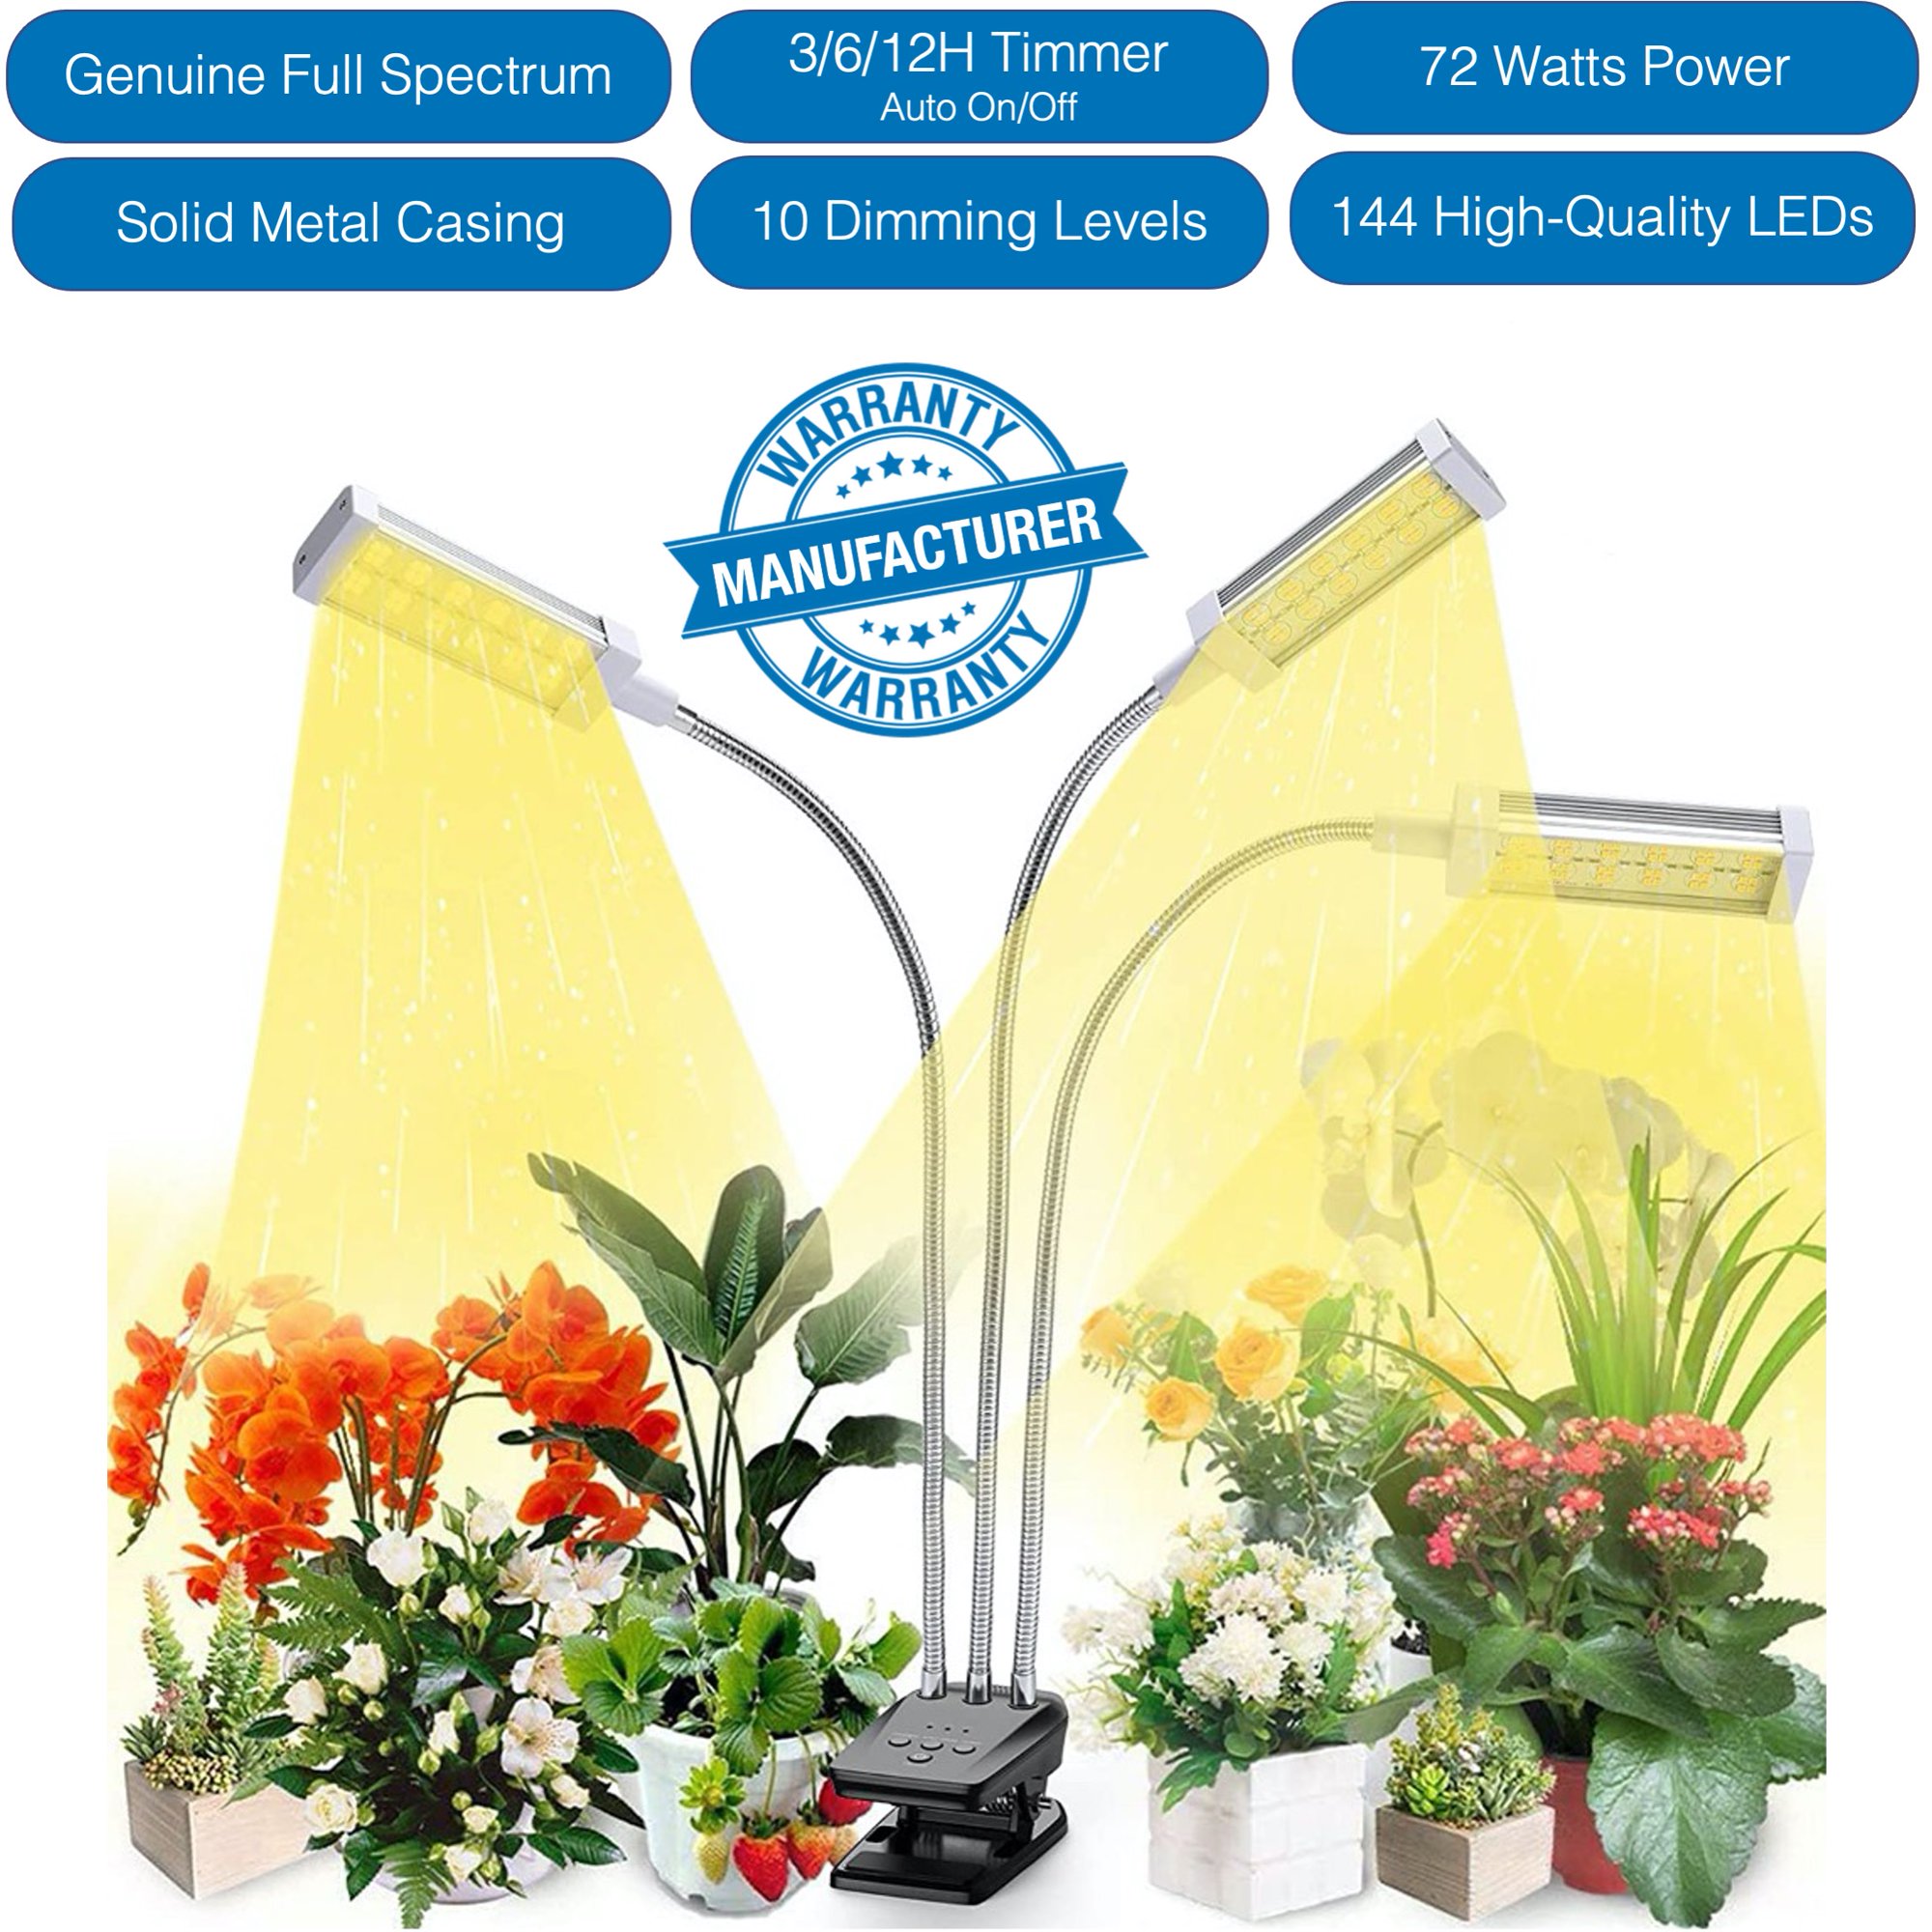 Grow Lights for Indoor Plants, 72W Full Spectrum adjustable（free shipping） $27.99